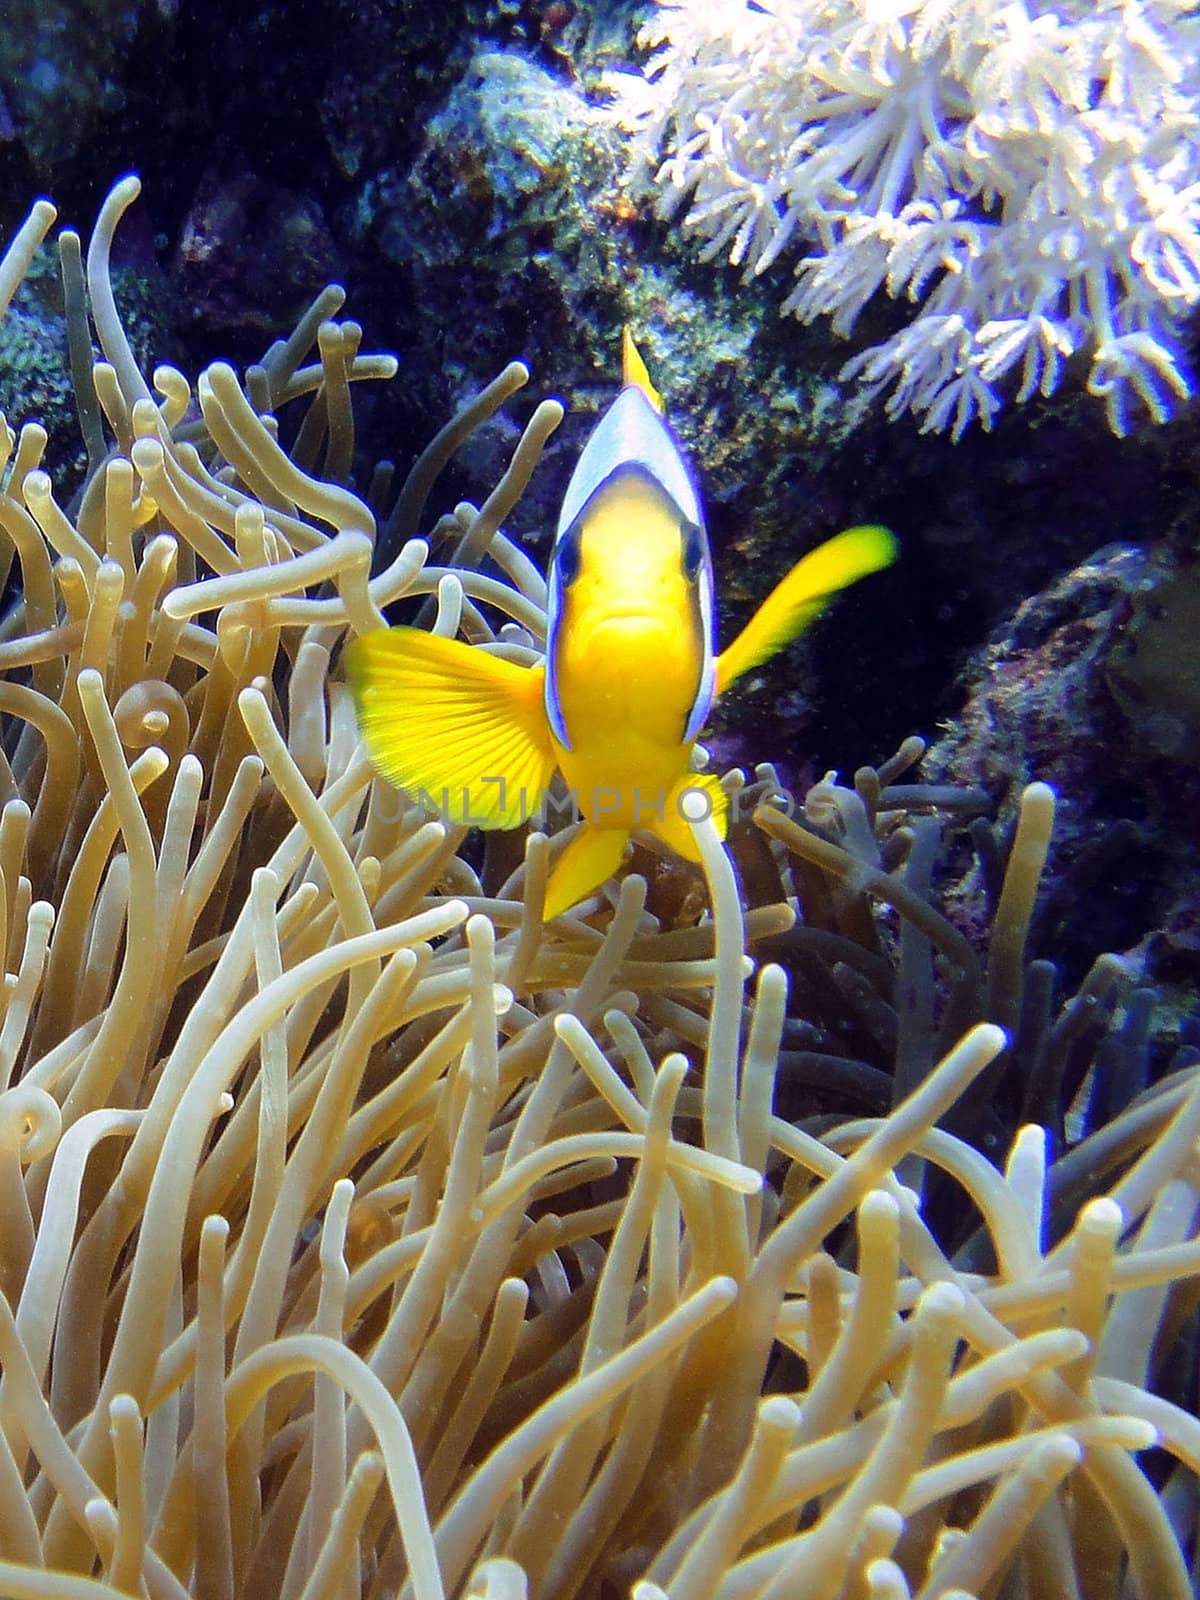 Underwater scene. Amphiprion and his anemone.